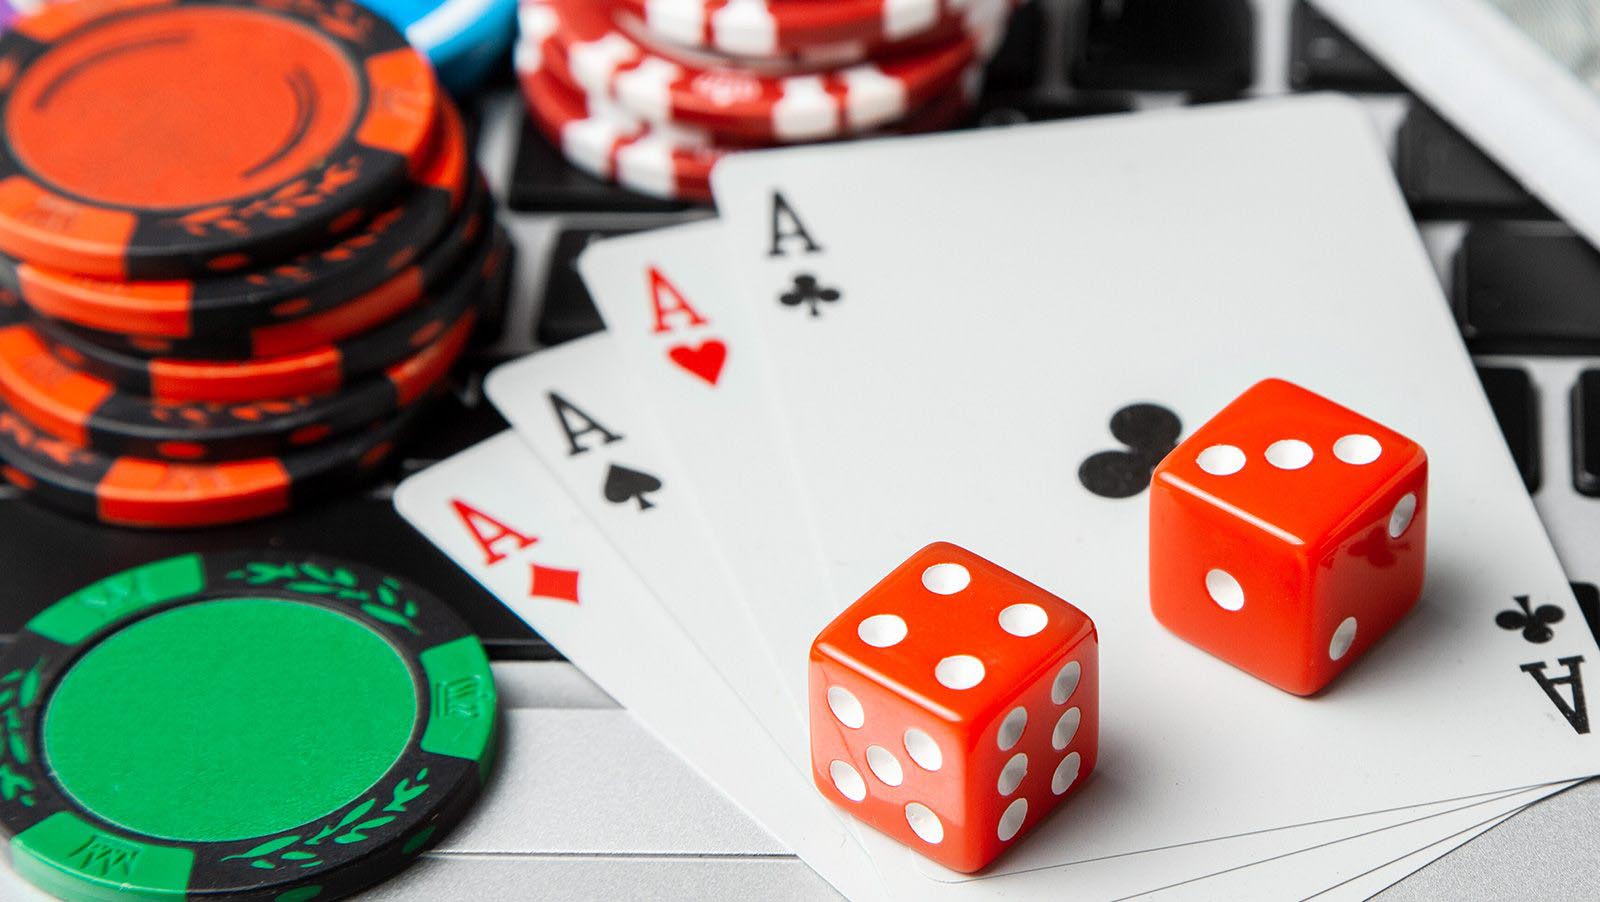 How to Choose a Toto Casino